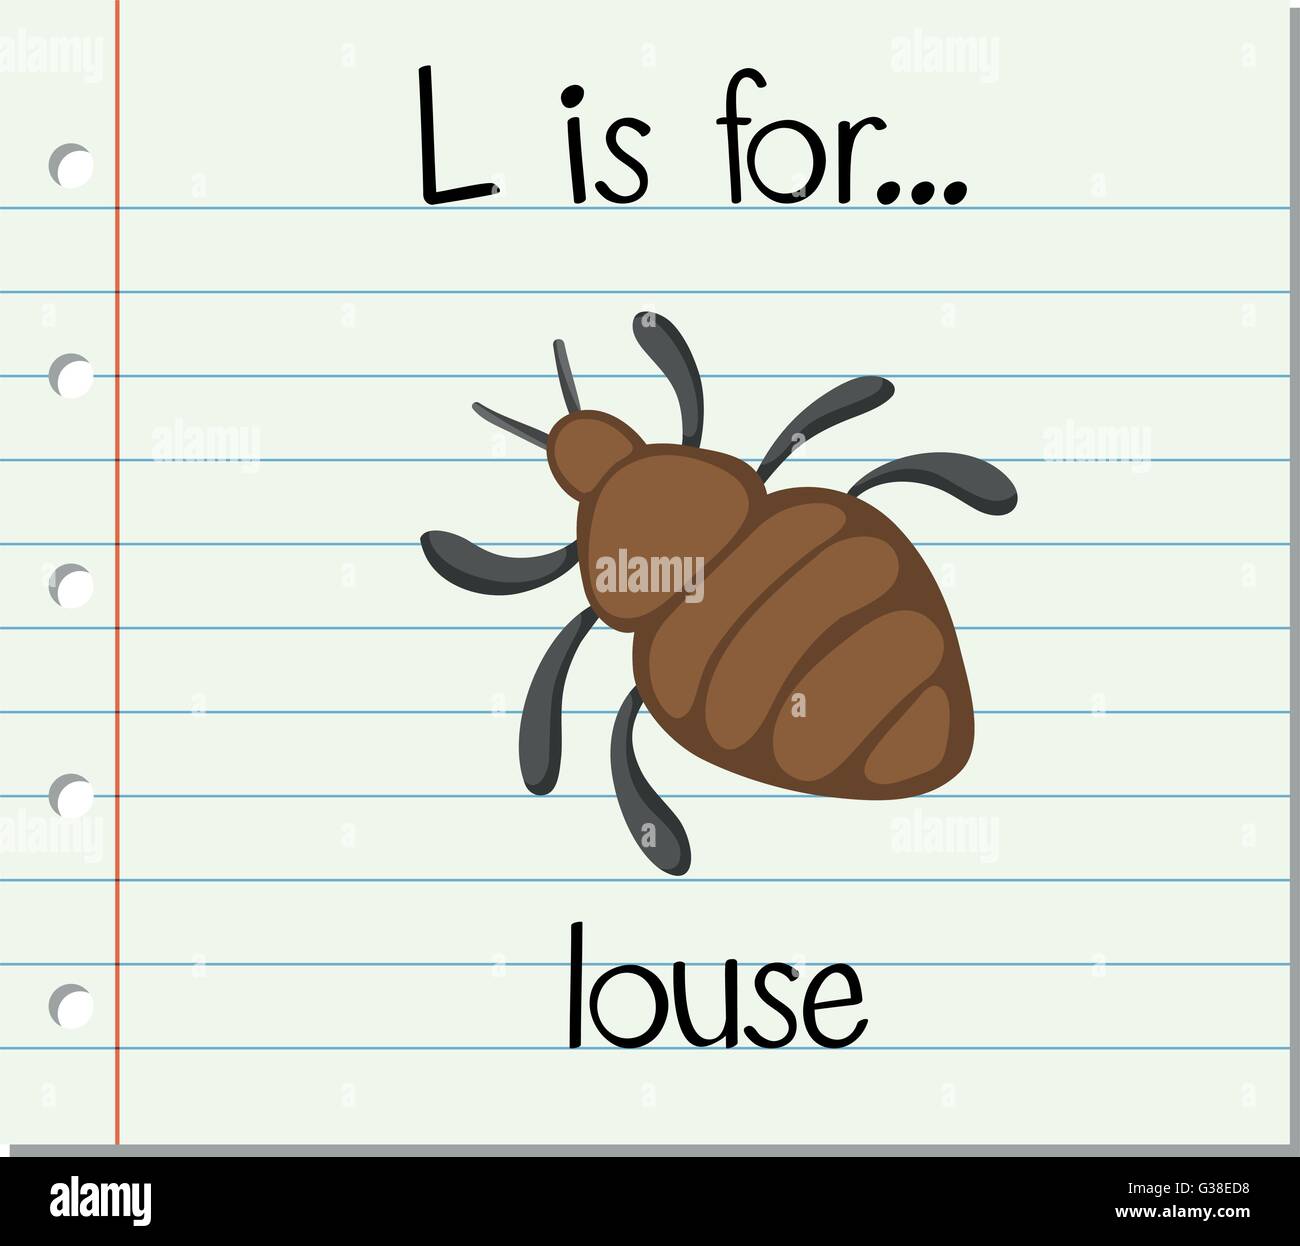 Flashcard letter L is for louse illustration Stock Vector